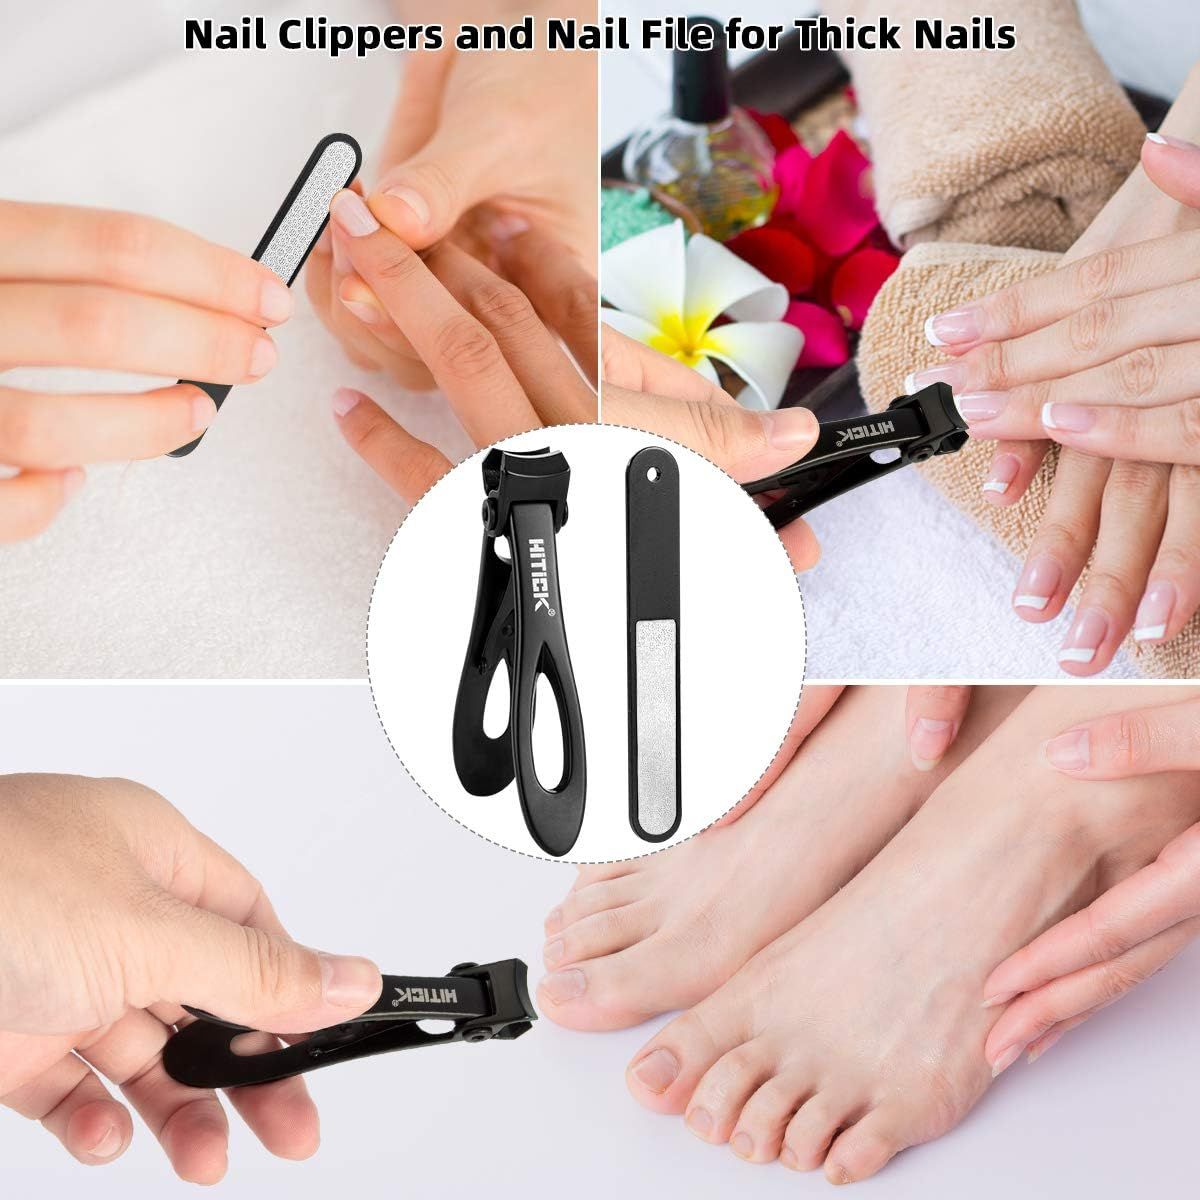 Stainless Steel Nail Clipper Set (s), Thick Nail Clippers Wide Jaw Nail  Cutter For Thick Toenails Fingernails, Heavy Duty Finger Toe Nail Clipper  Trim